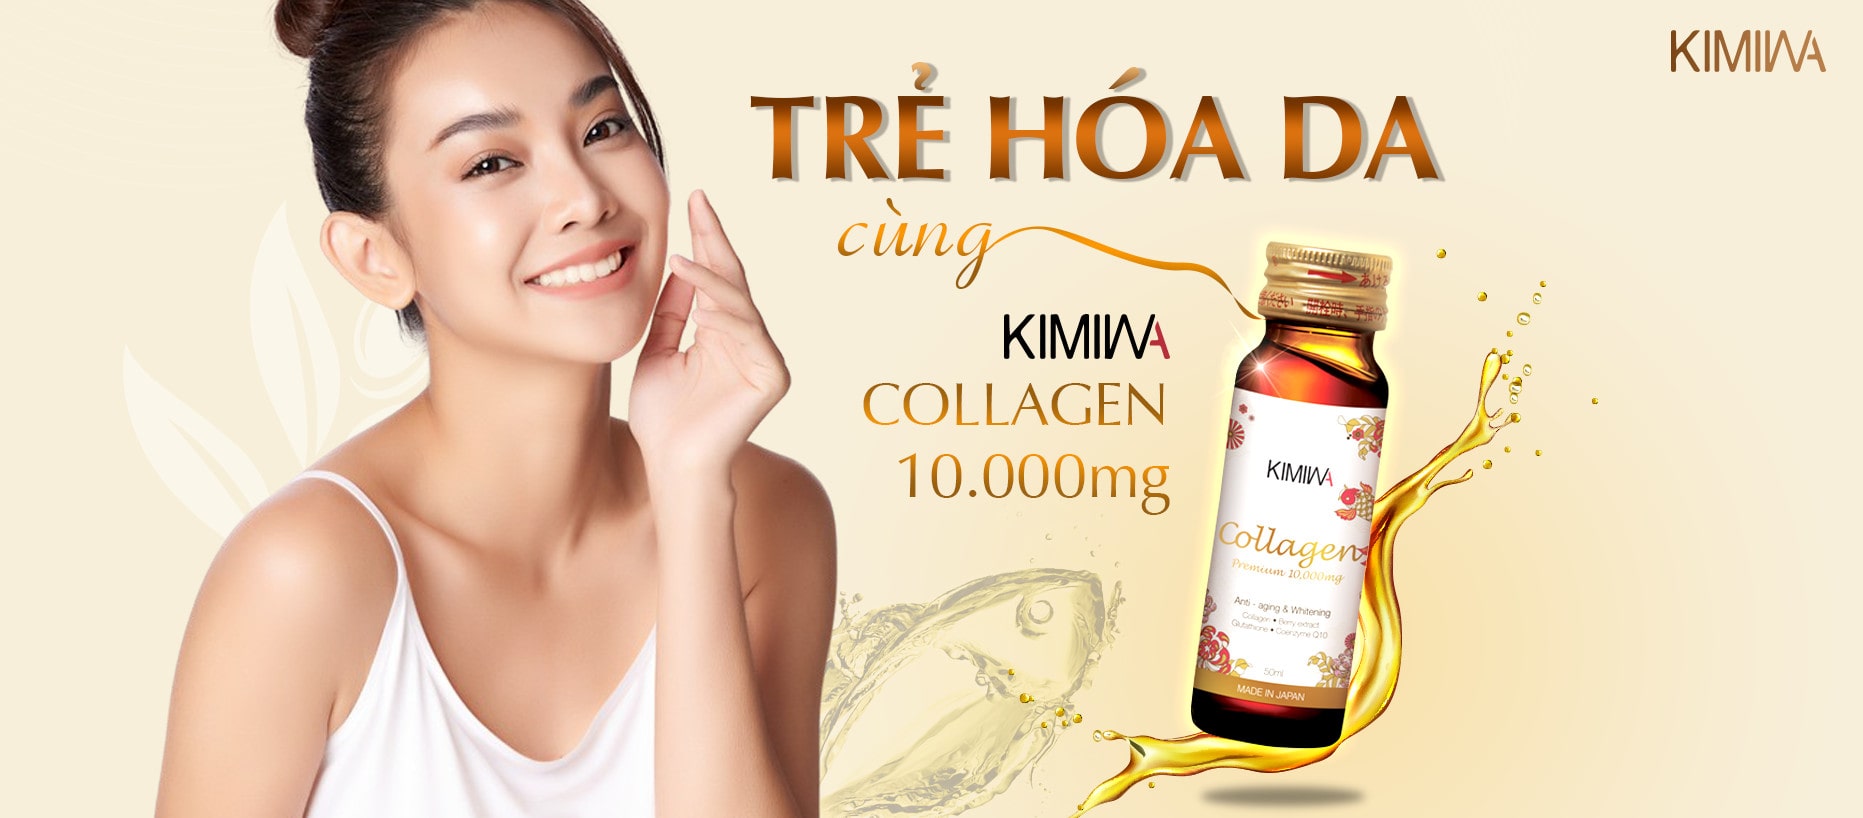 Kimiwa Collagen chứa hàm lượng cao collagen peptide